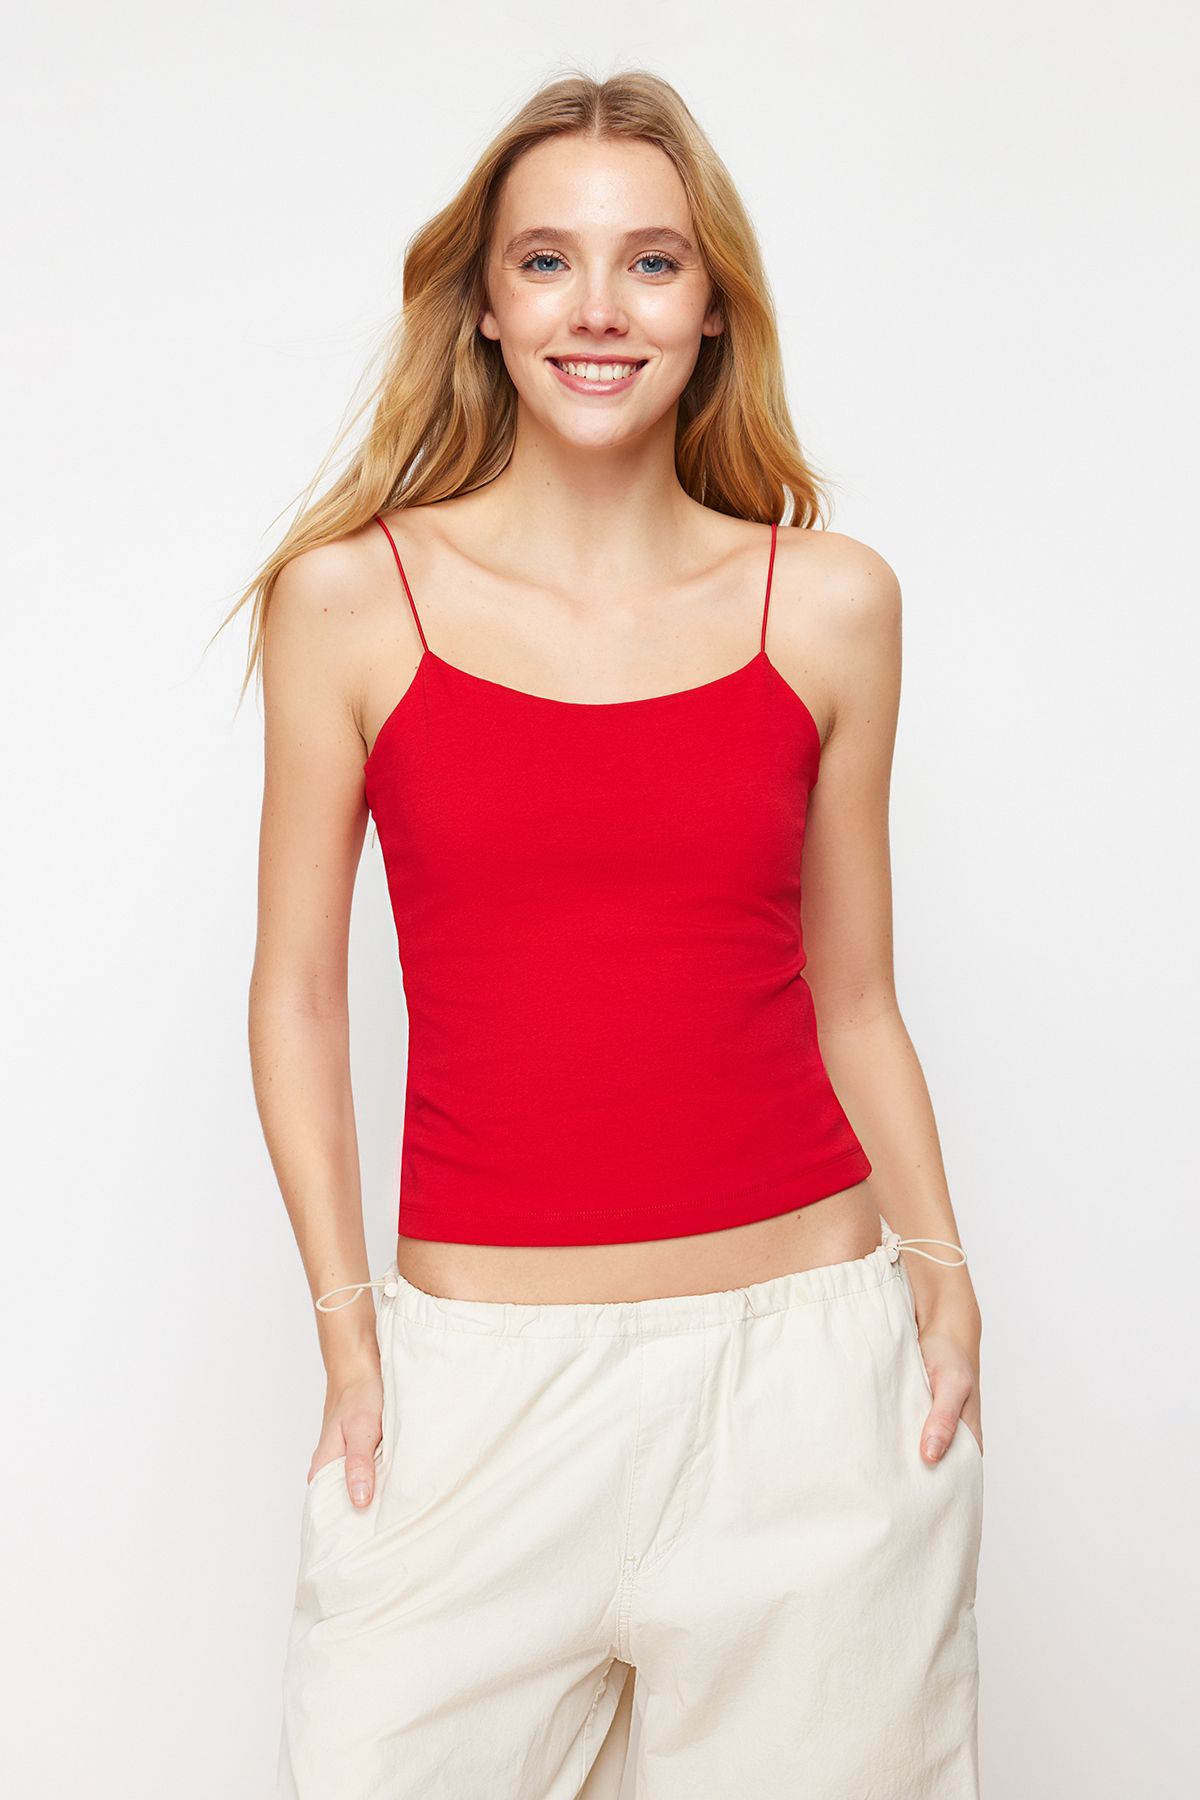 Trendyol Collection Red Camisoles Styles, Prices - Trendyol